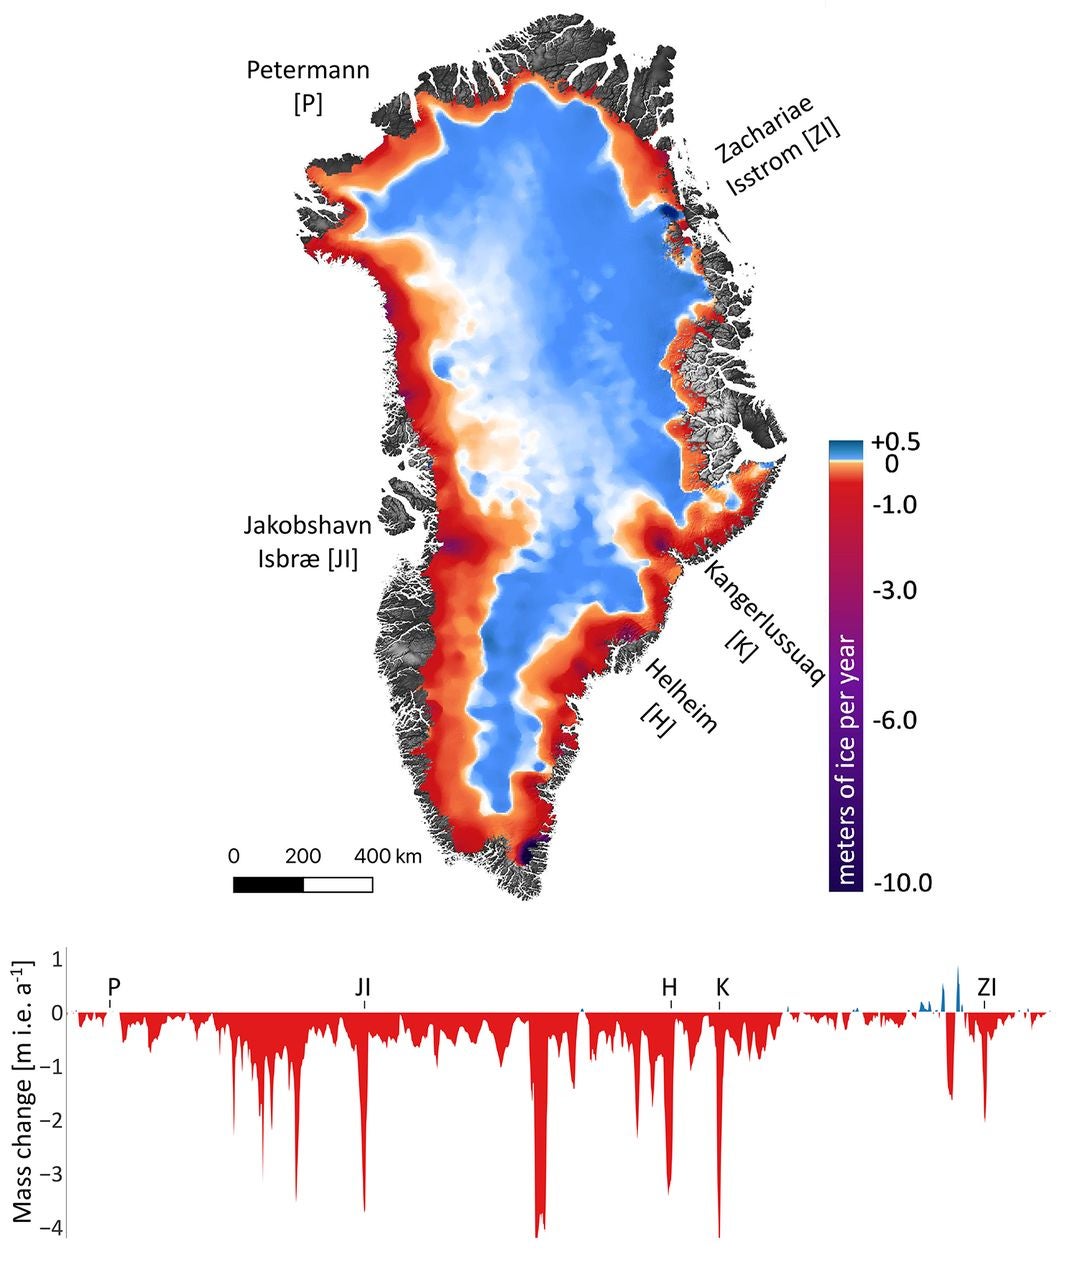 Mass loss from Greenland Ice Sheet between 2003 and 2019